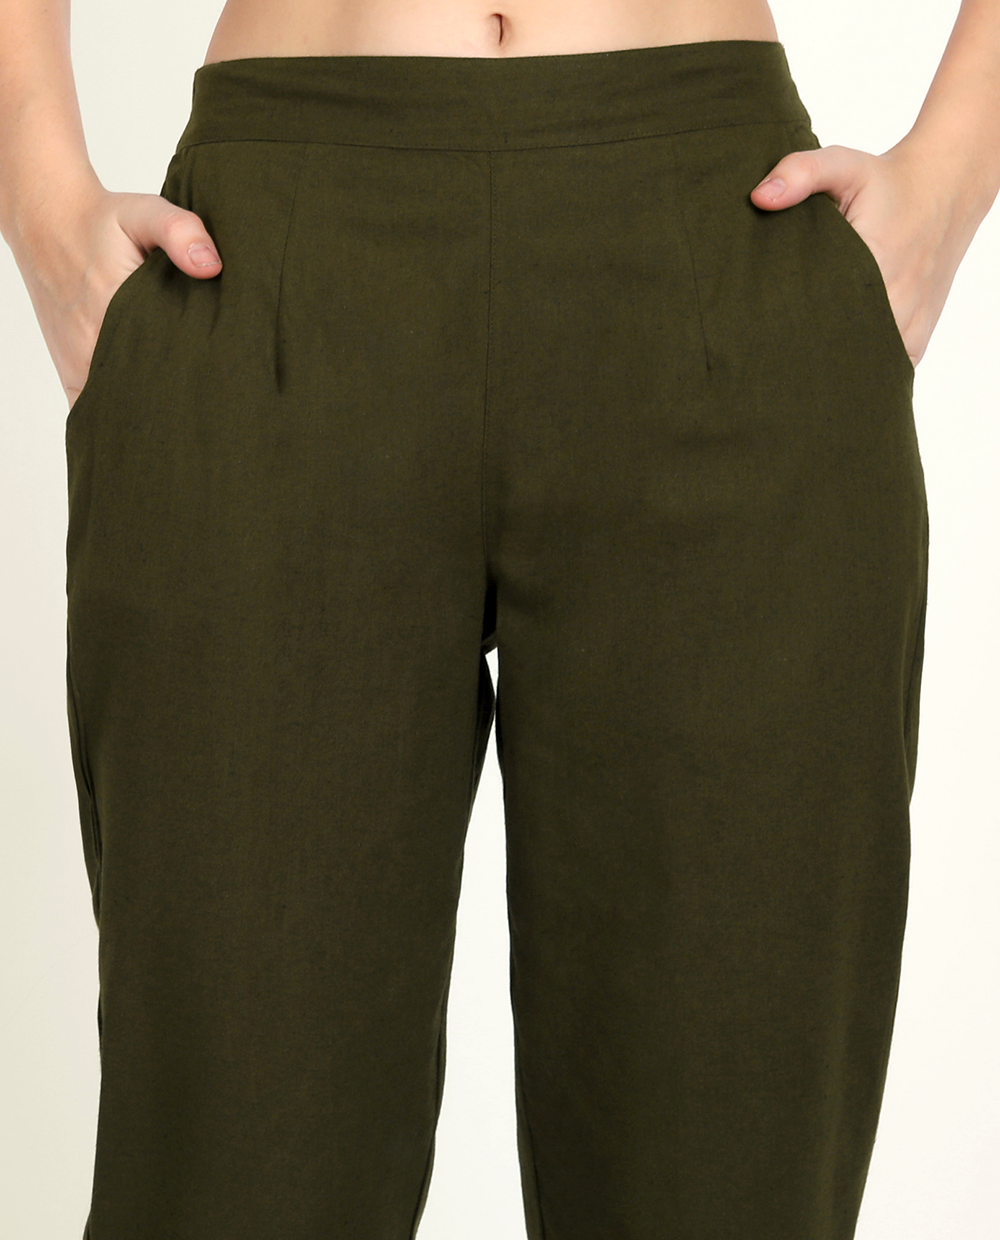 Buy Regular Trousers Olive Green and Gray Combo of 2 Cotton for Best Price  Reviews Free Shipping